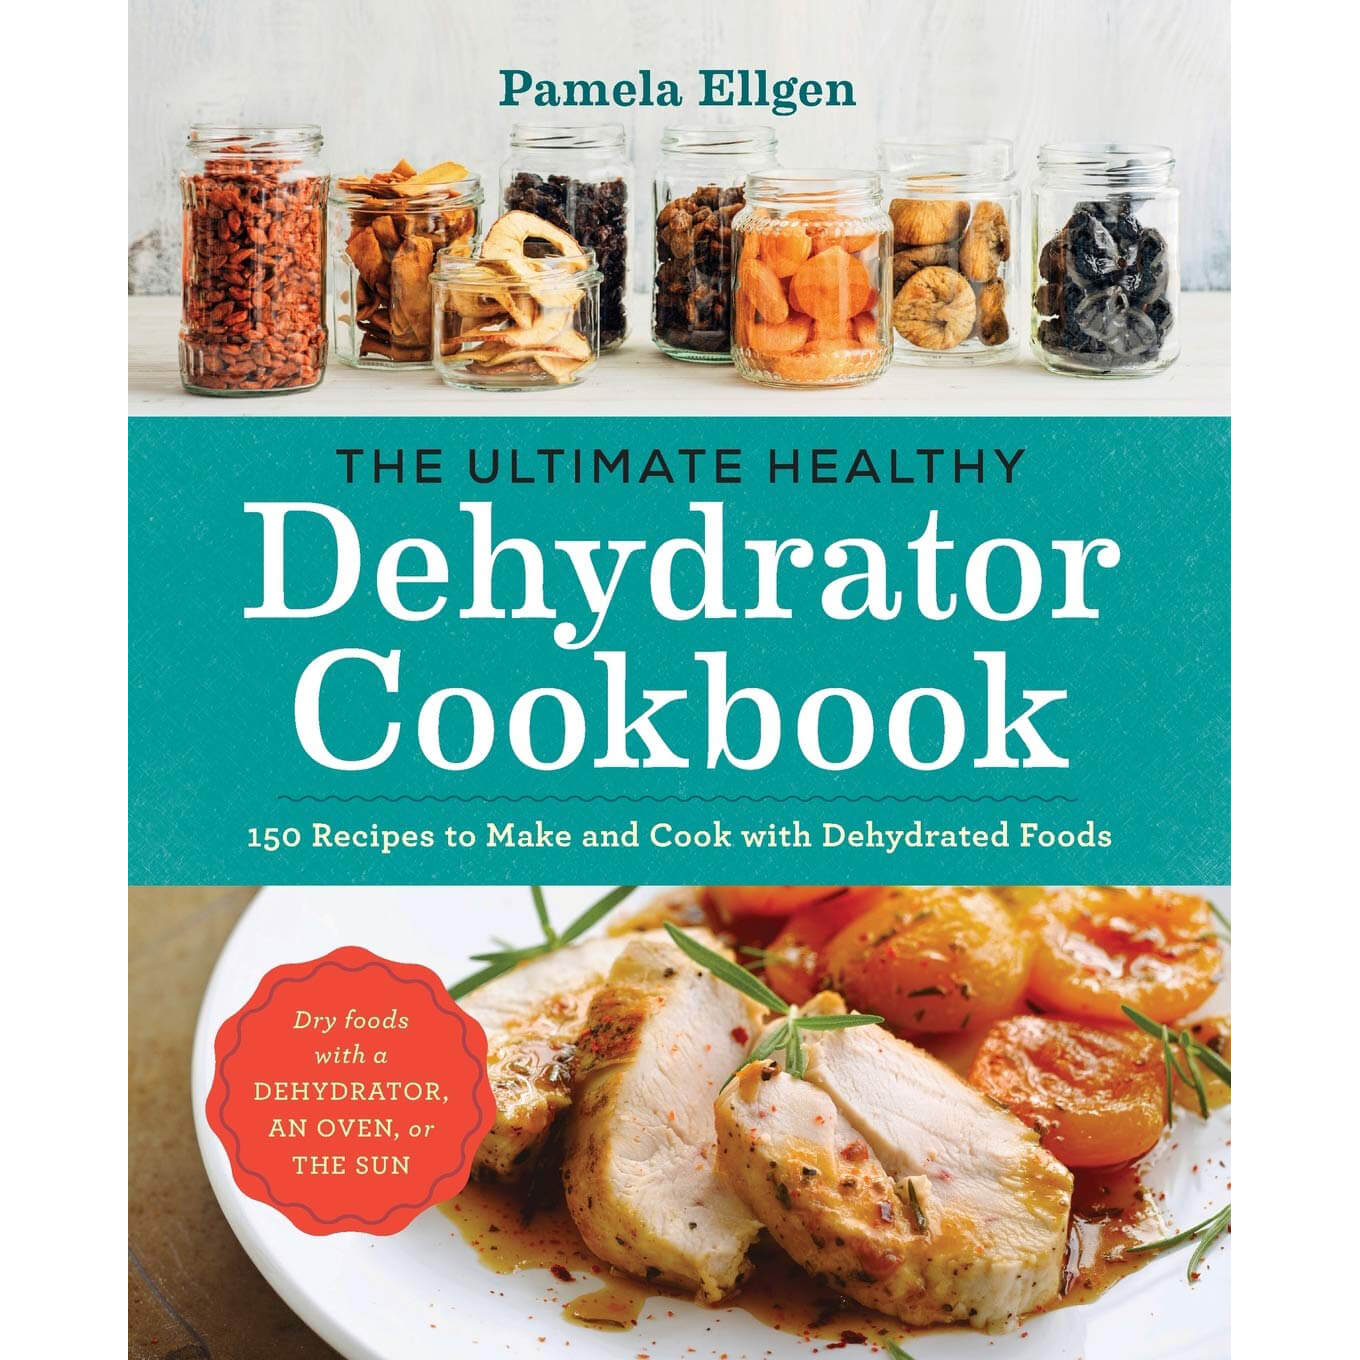 https://cdn.shopify.com/s/files/1/0445/3443/1904/products/the-ultimate-healthy-dehydrator-cookbook_1600x.jpg?v=1624516351